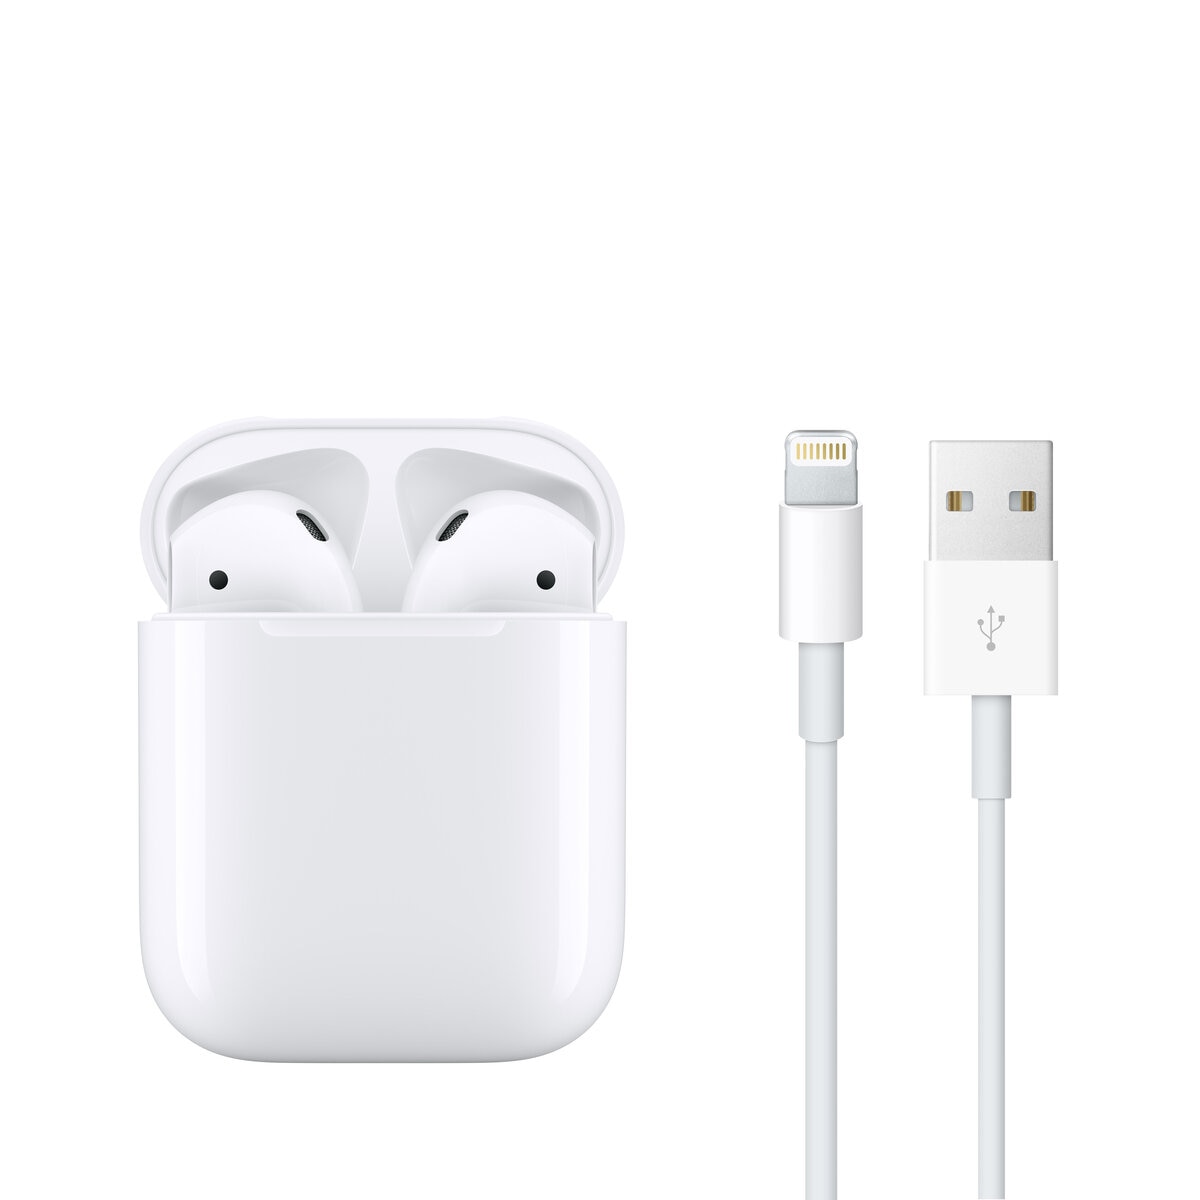 Apple AirPods with Charging Case 第2世代